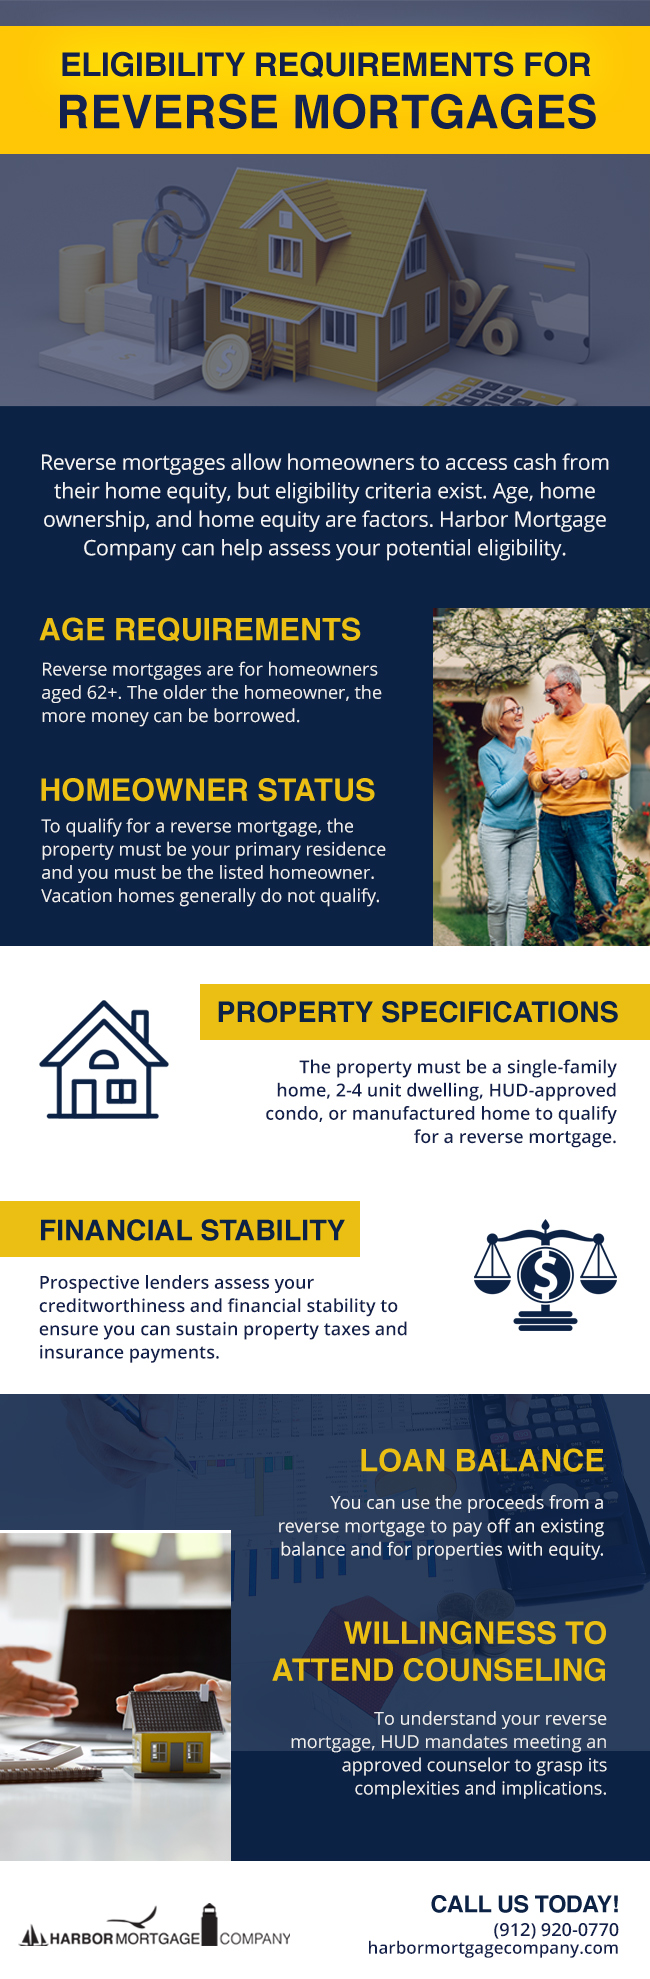 Learn More About Qualifying for a Reverse Mortgage